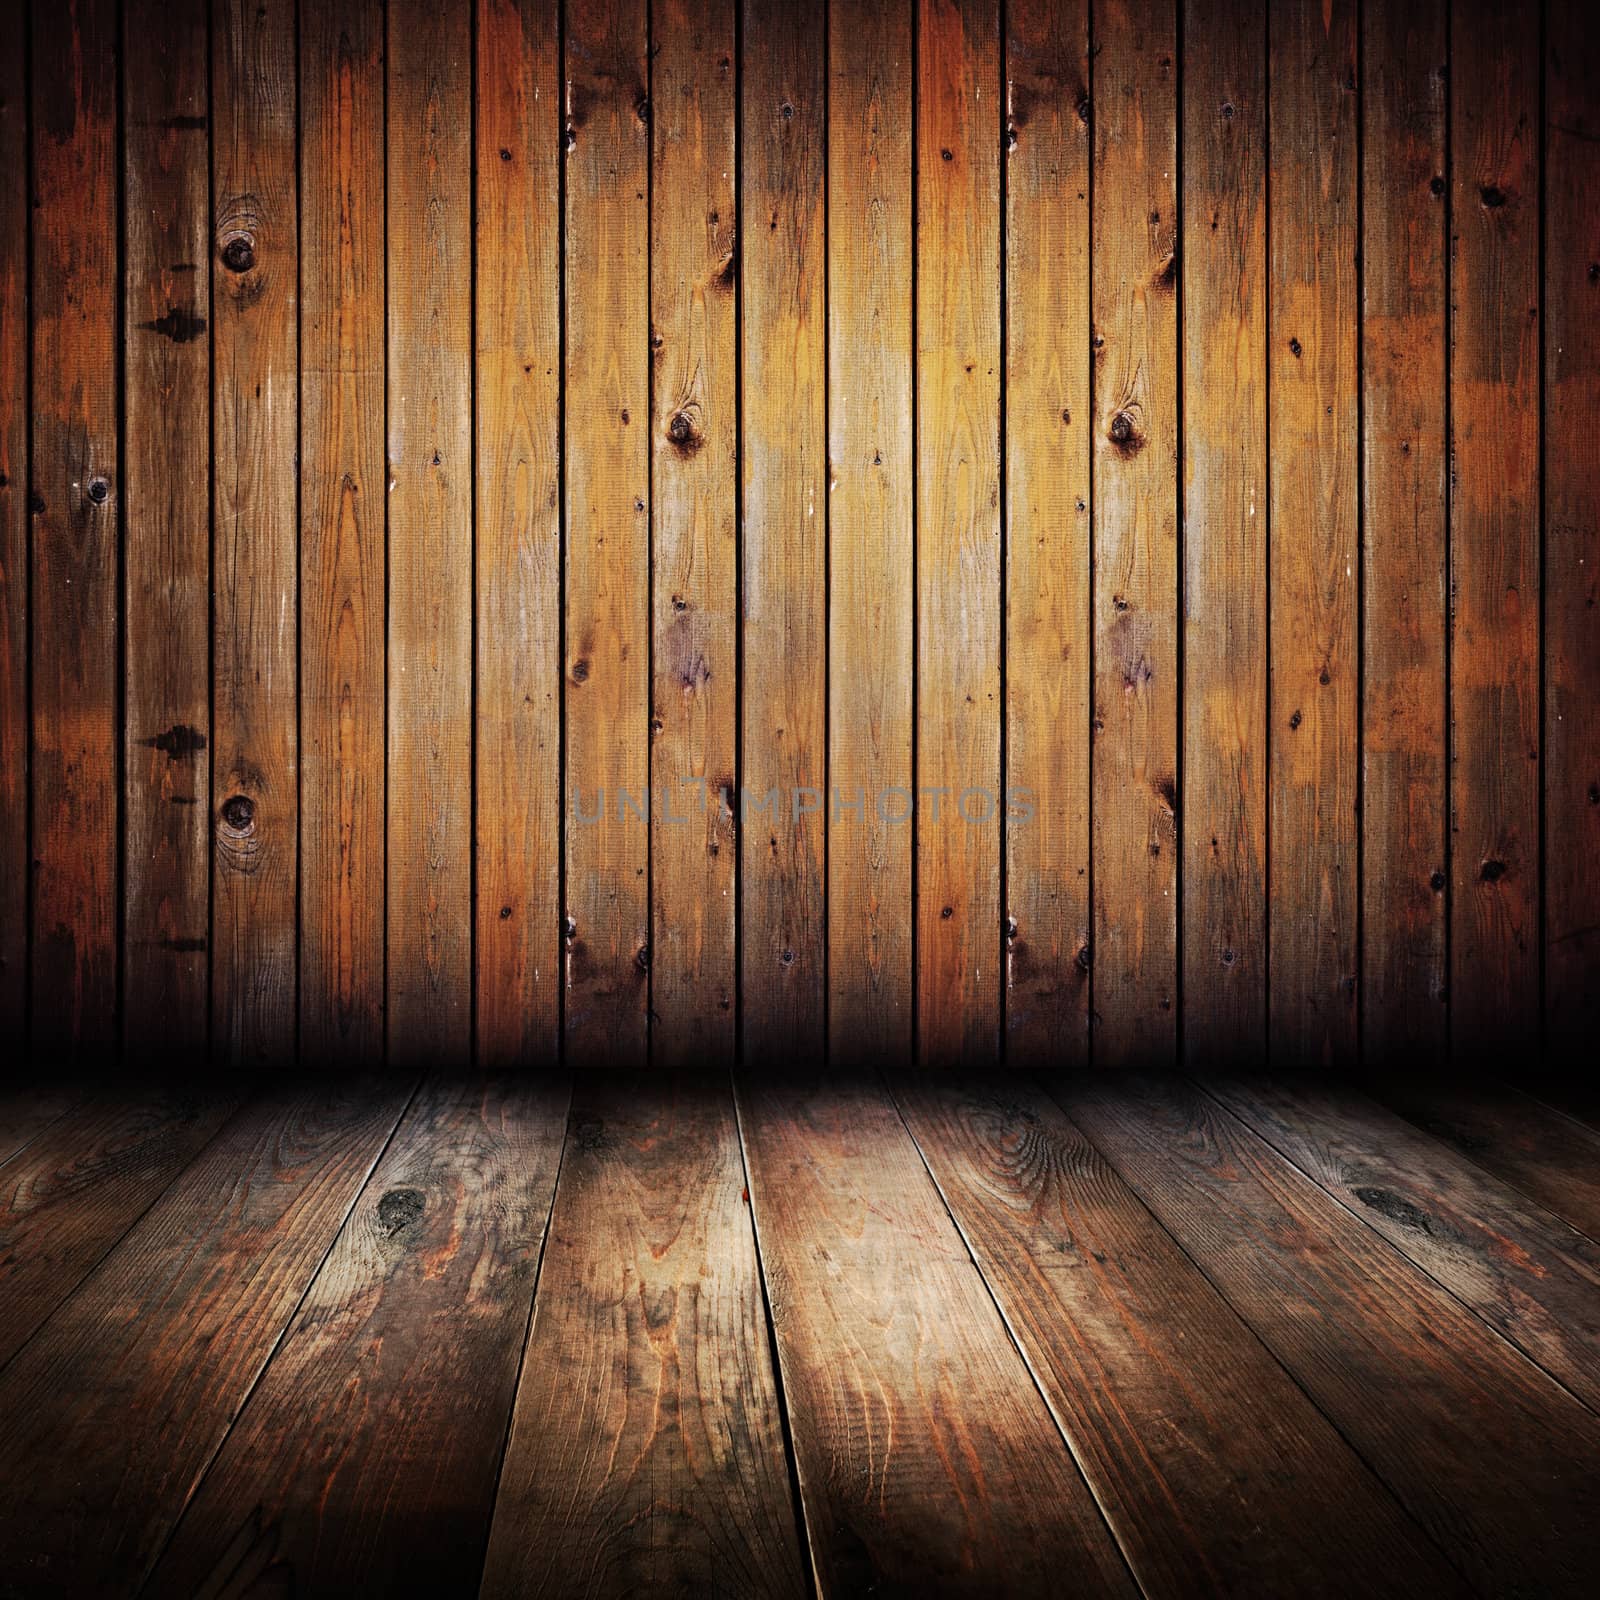 Vintage yellow wooden planks interior  by pashabo